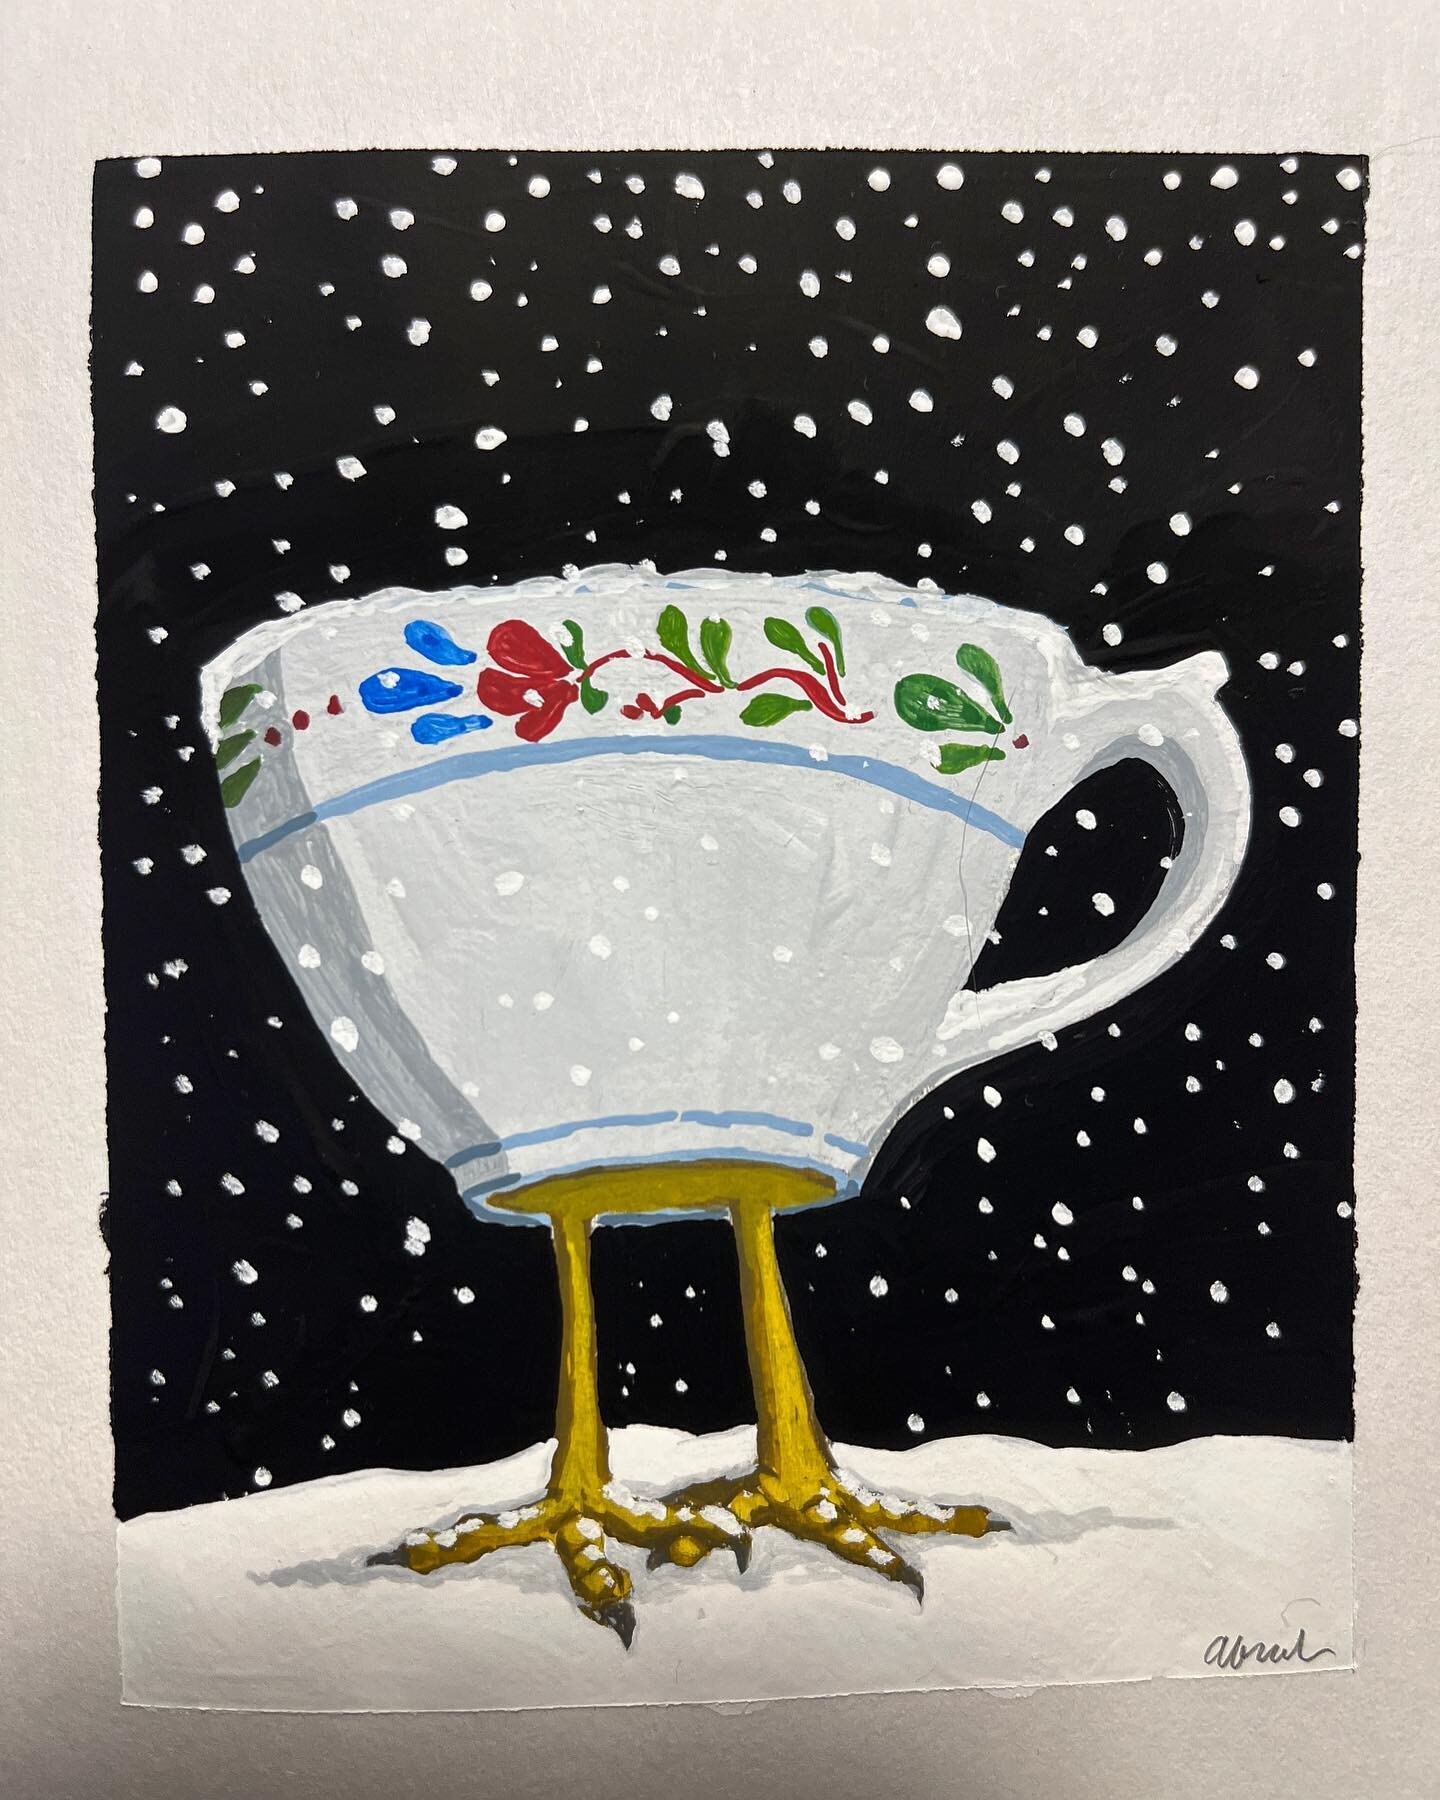 It snowed and I got to play with paint and baba yaga tea cups 😊 #snowday #sunday #gouache #babayaga #teacups #sketchbook #vermontartist